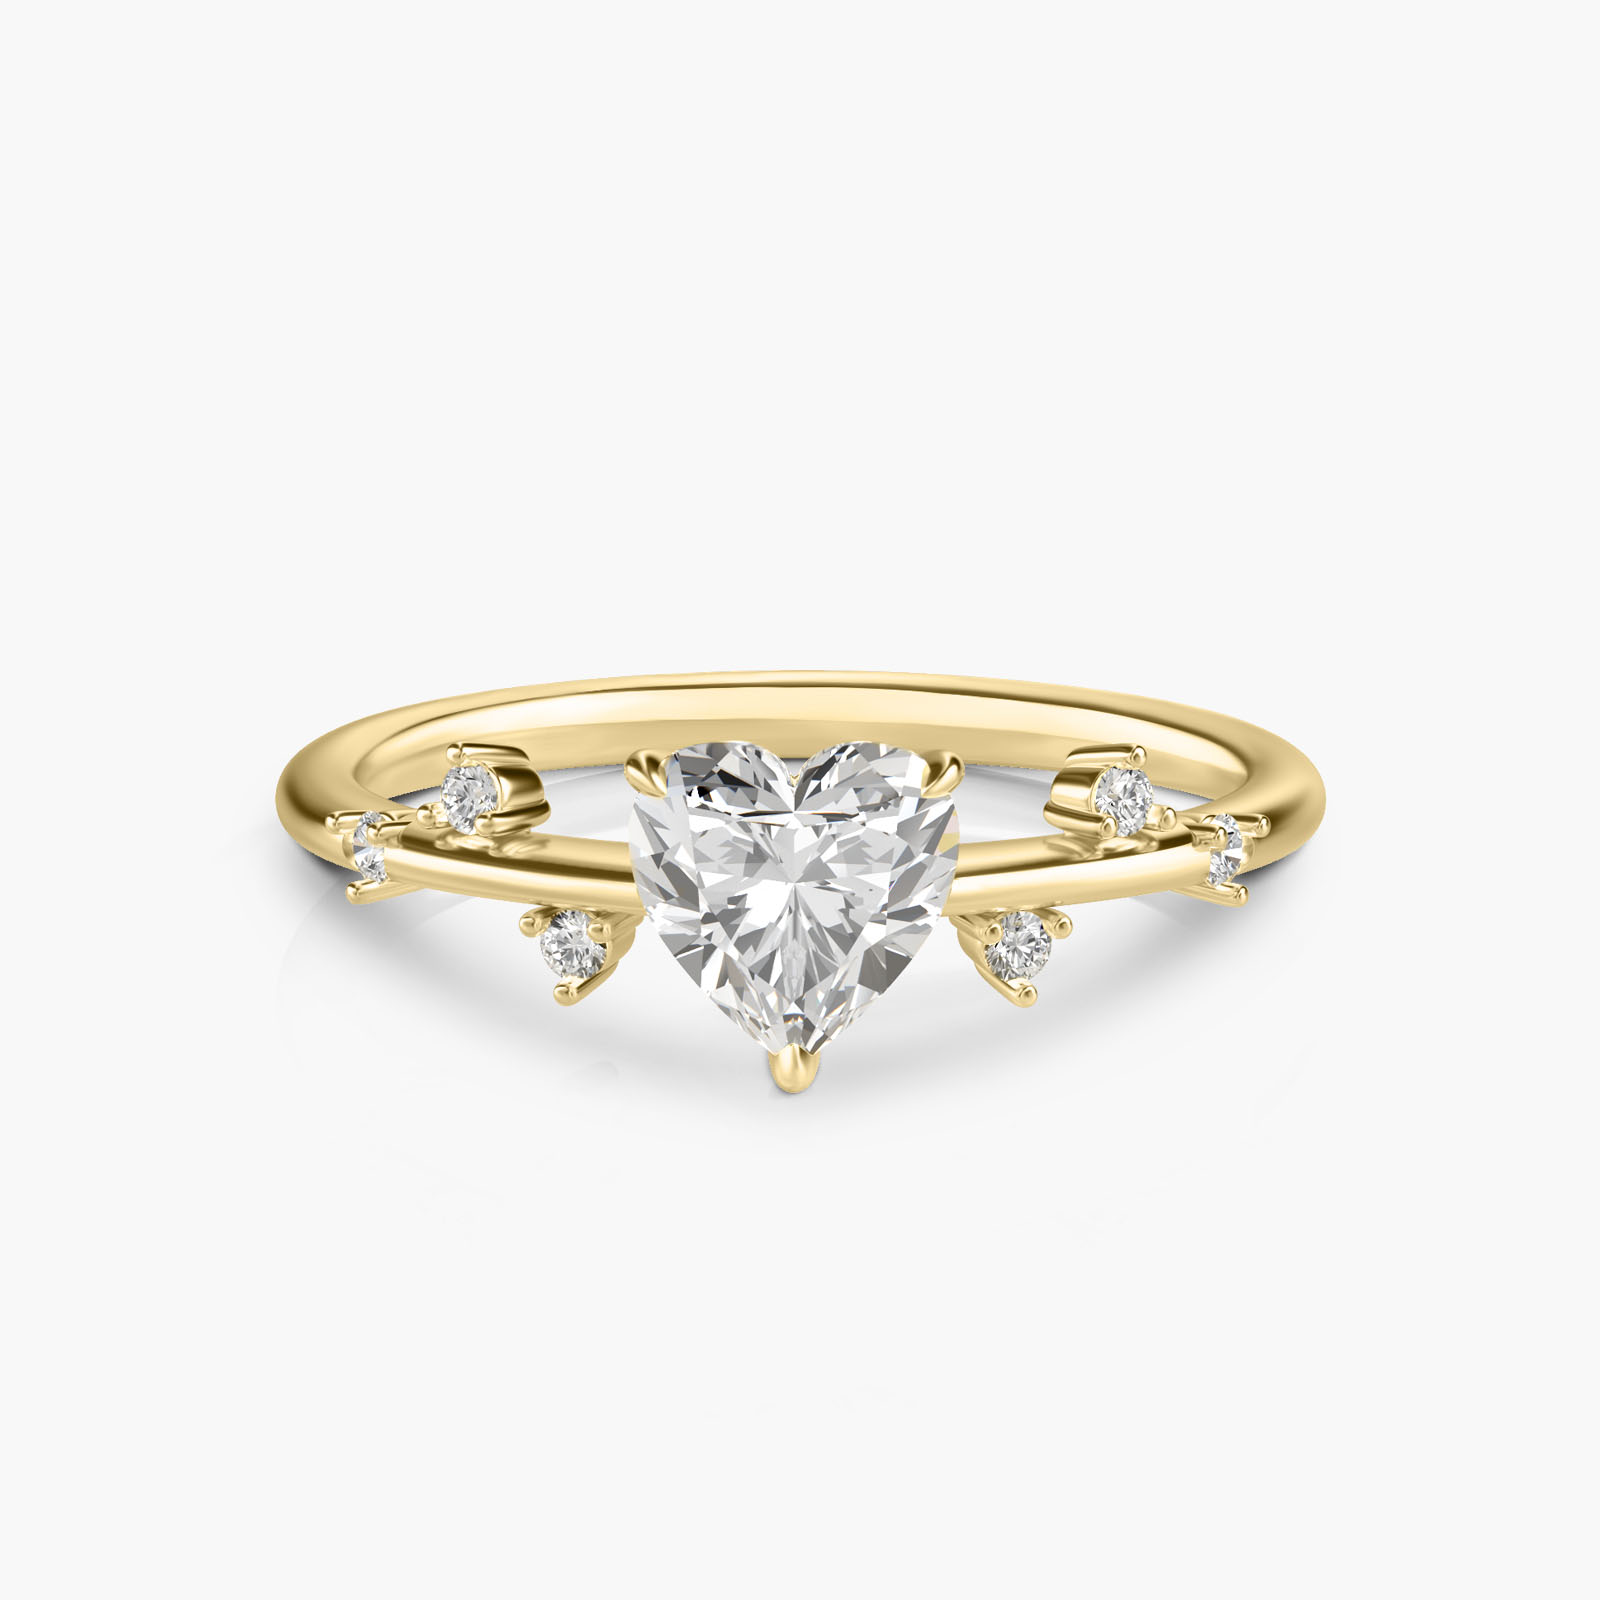 Quince branch Passionate Heart 18K Gold Diamond Ring